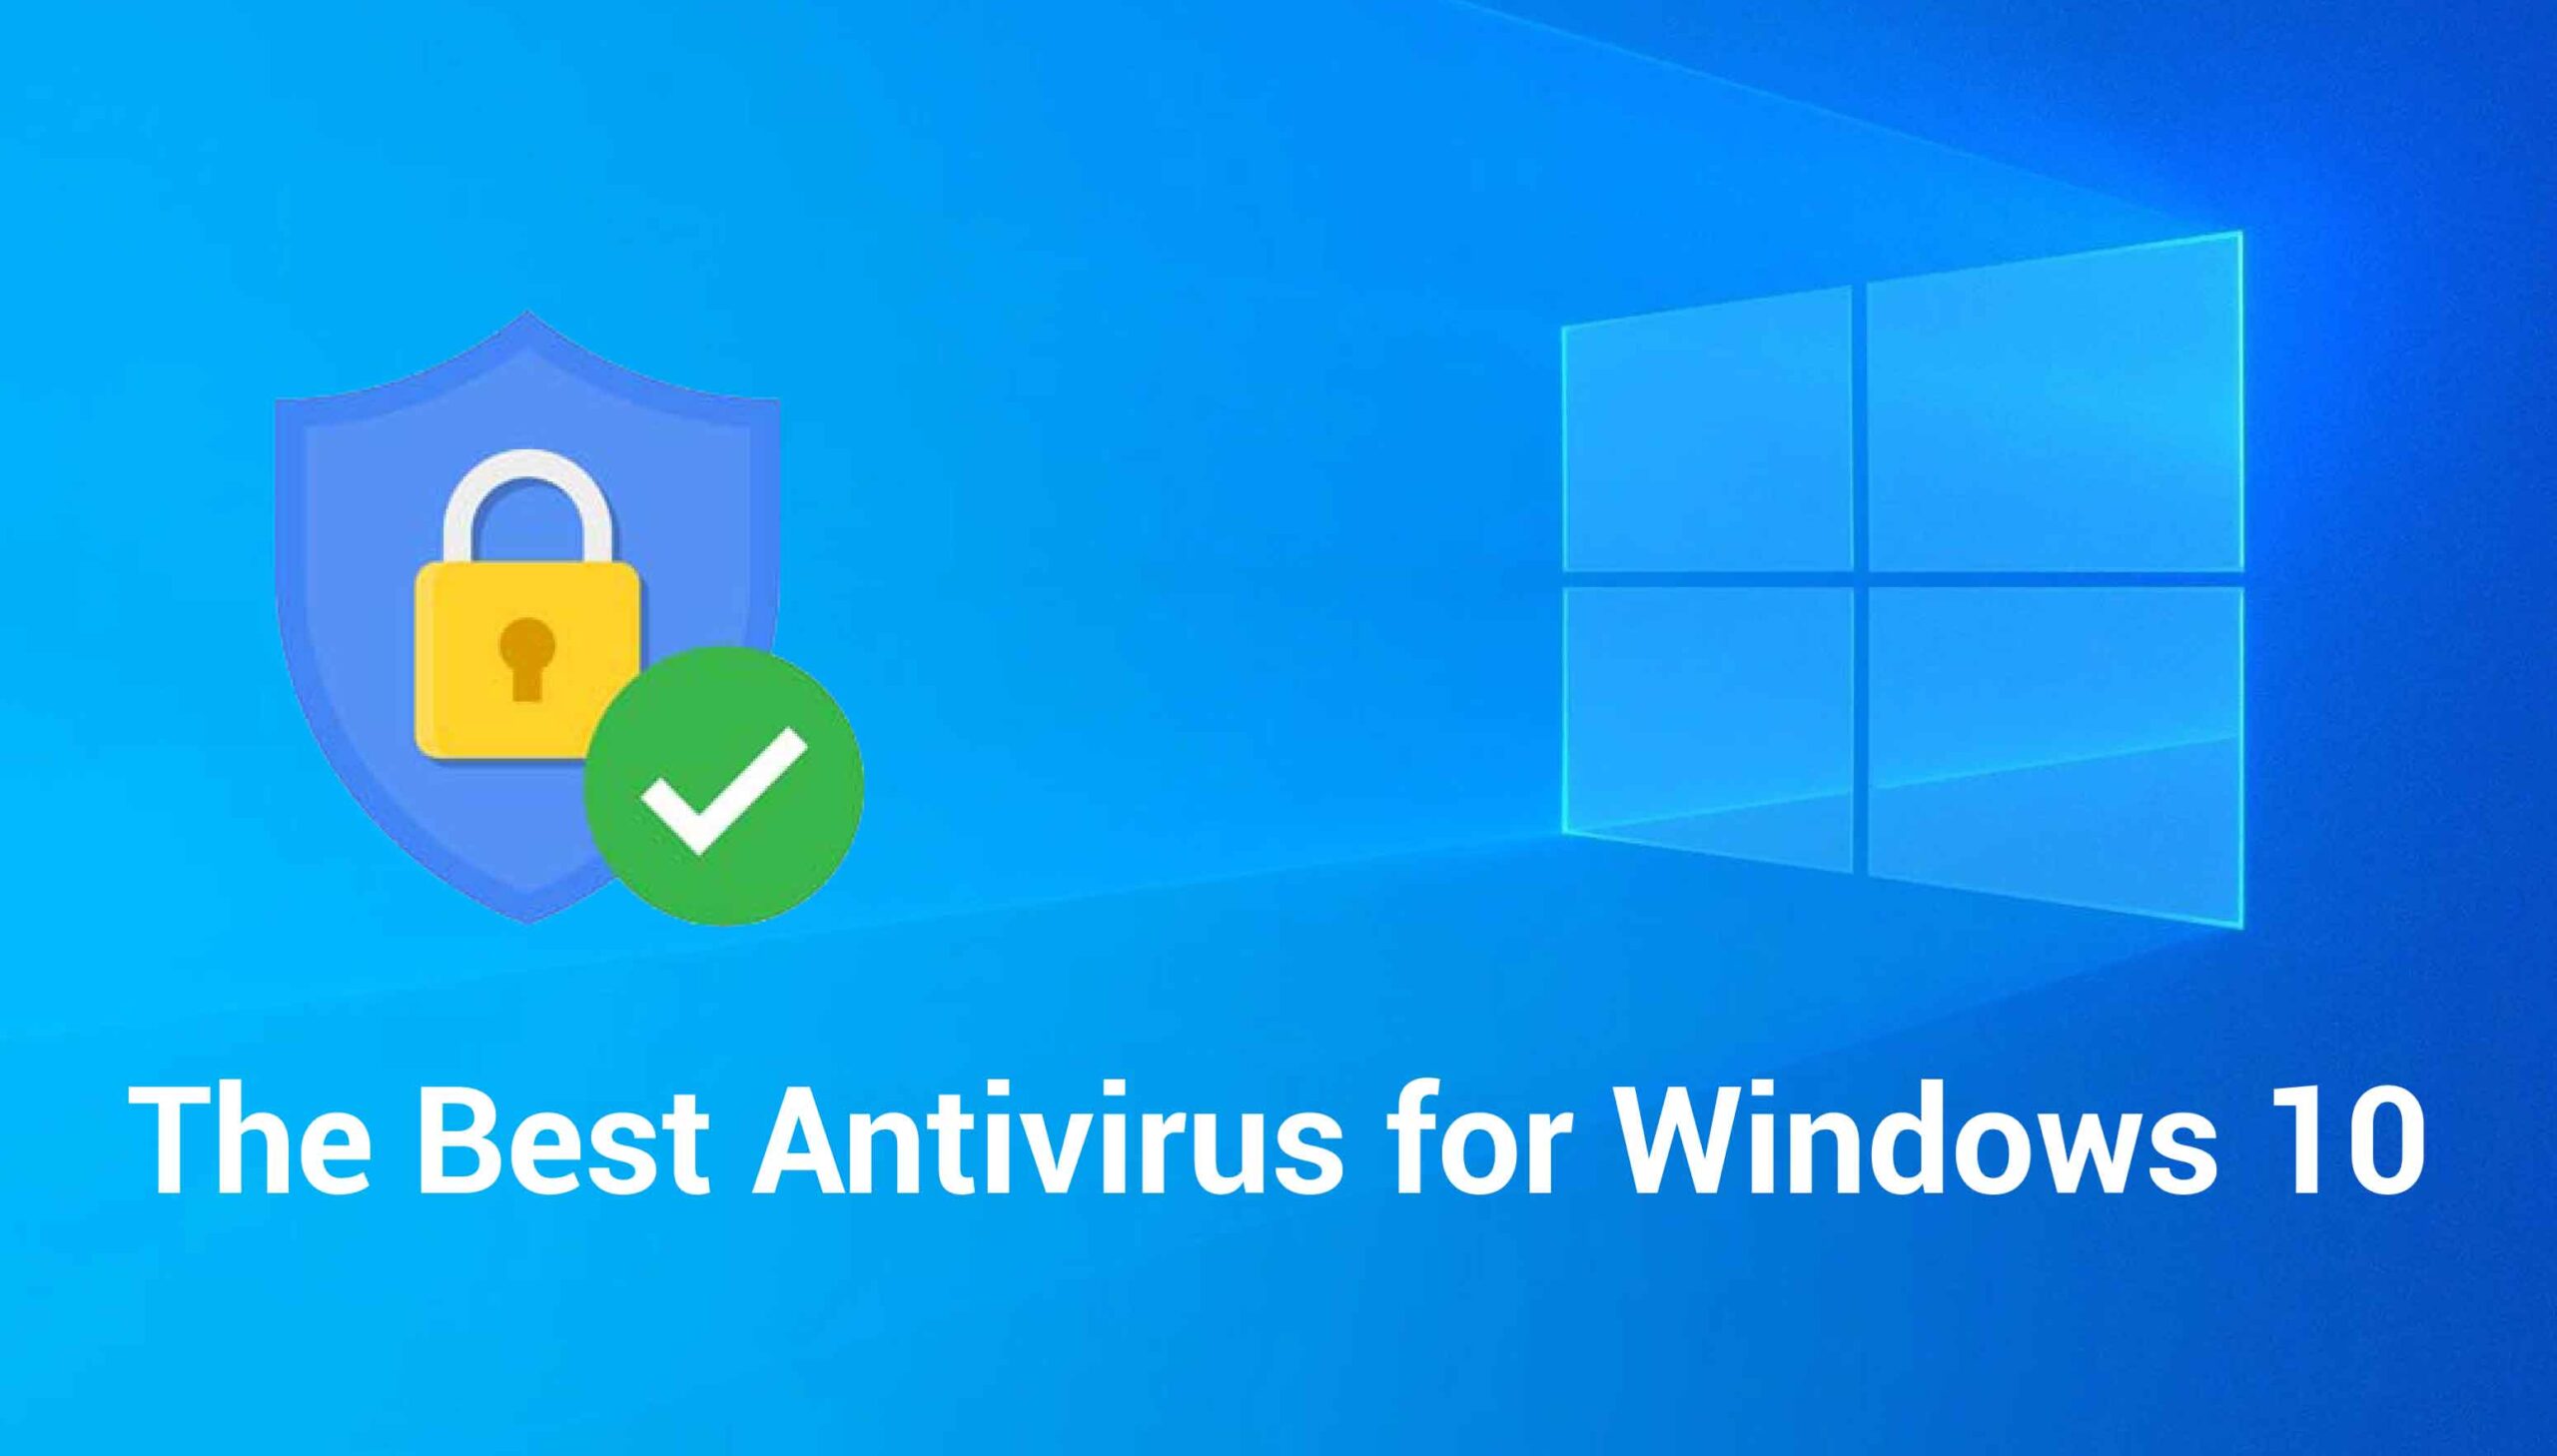 The best antivirus for Windows 10 (and 11)